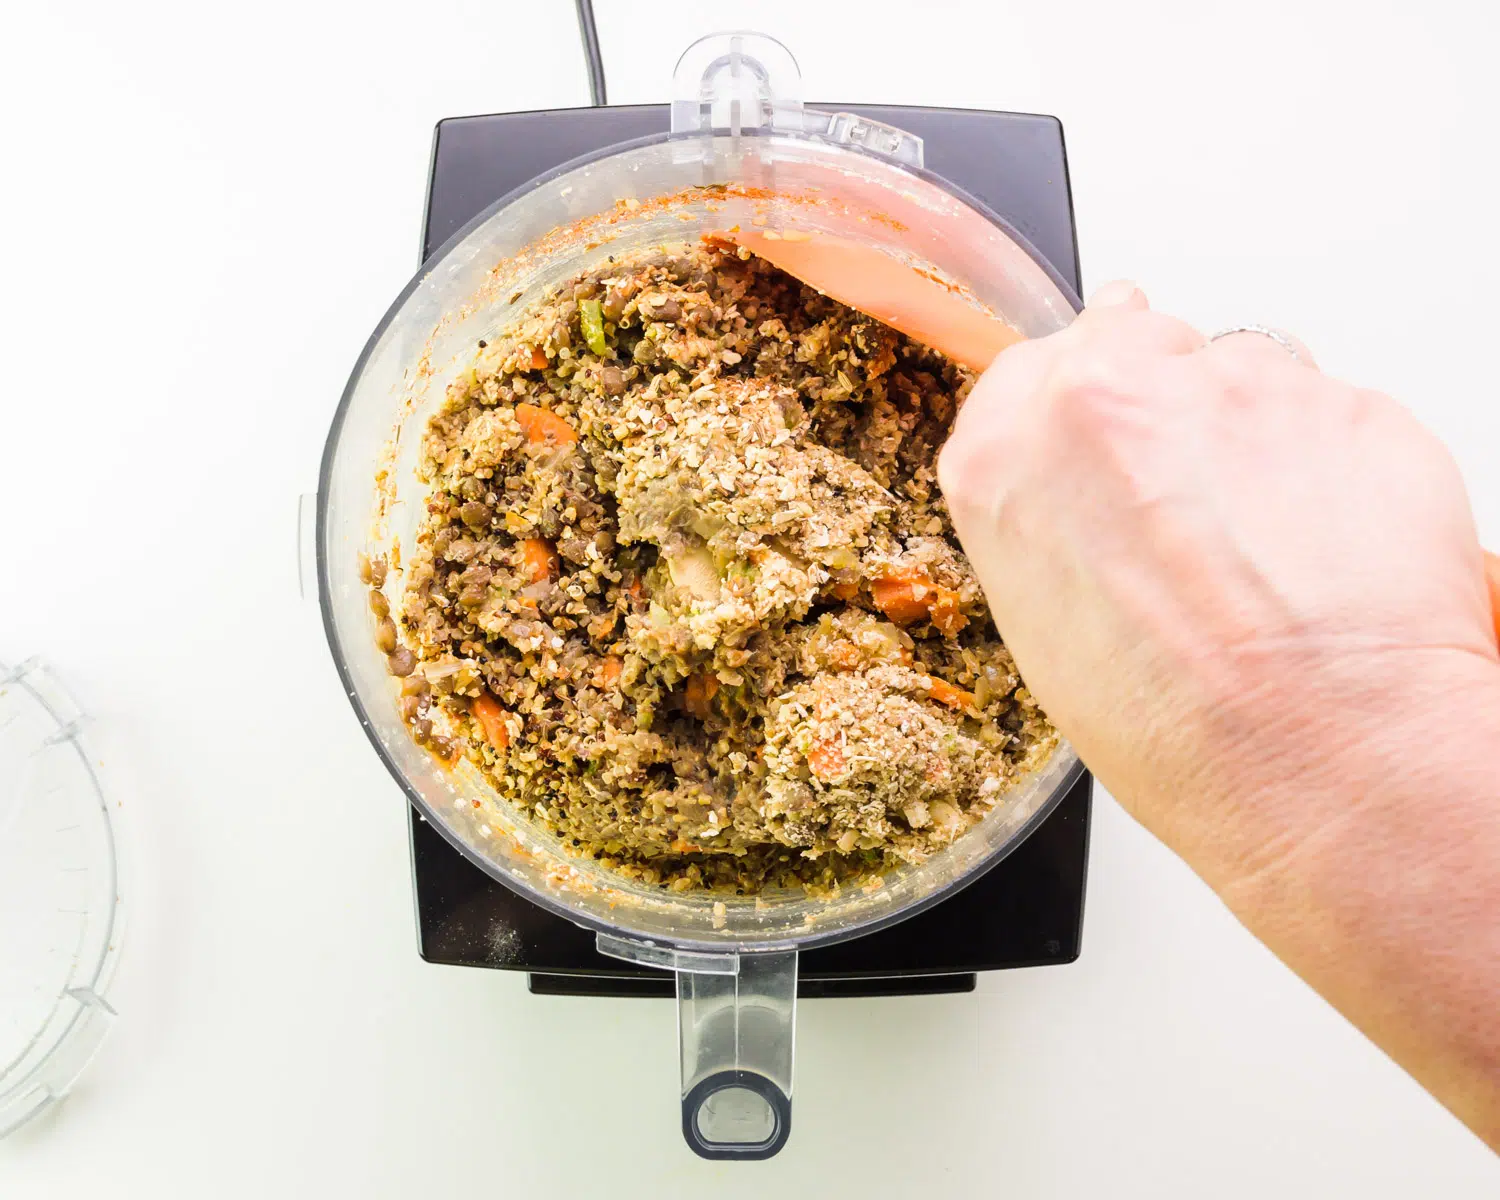 A hand holds a rubber spatula, using it to scrape down the side of a food processor bowl.